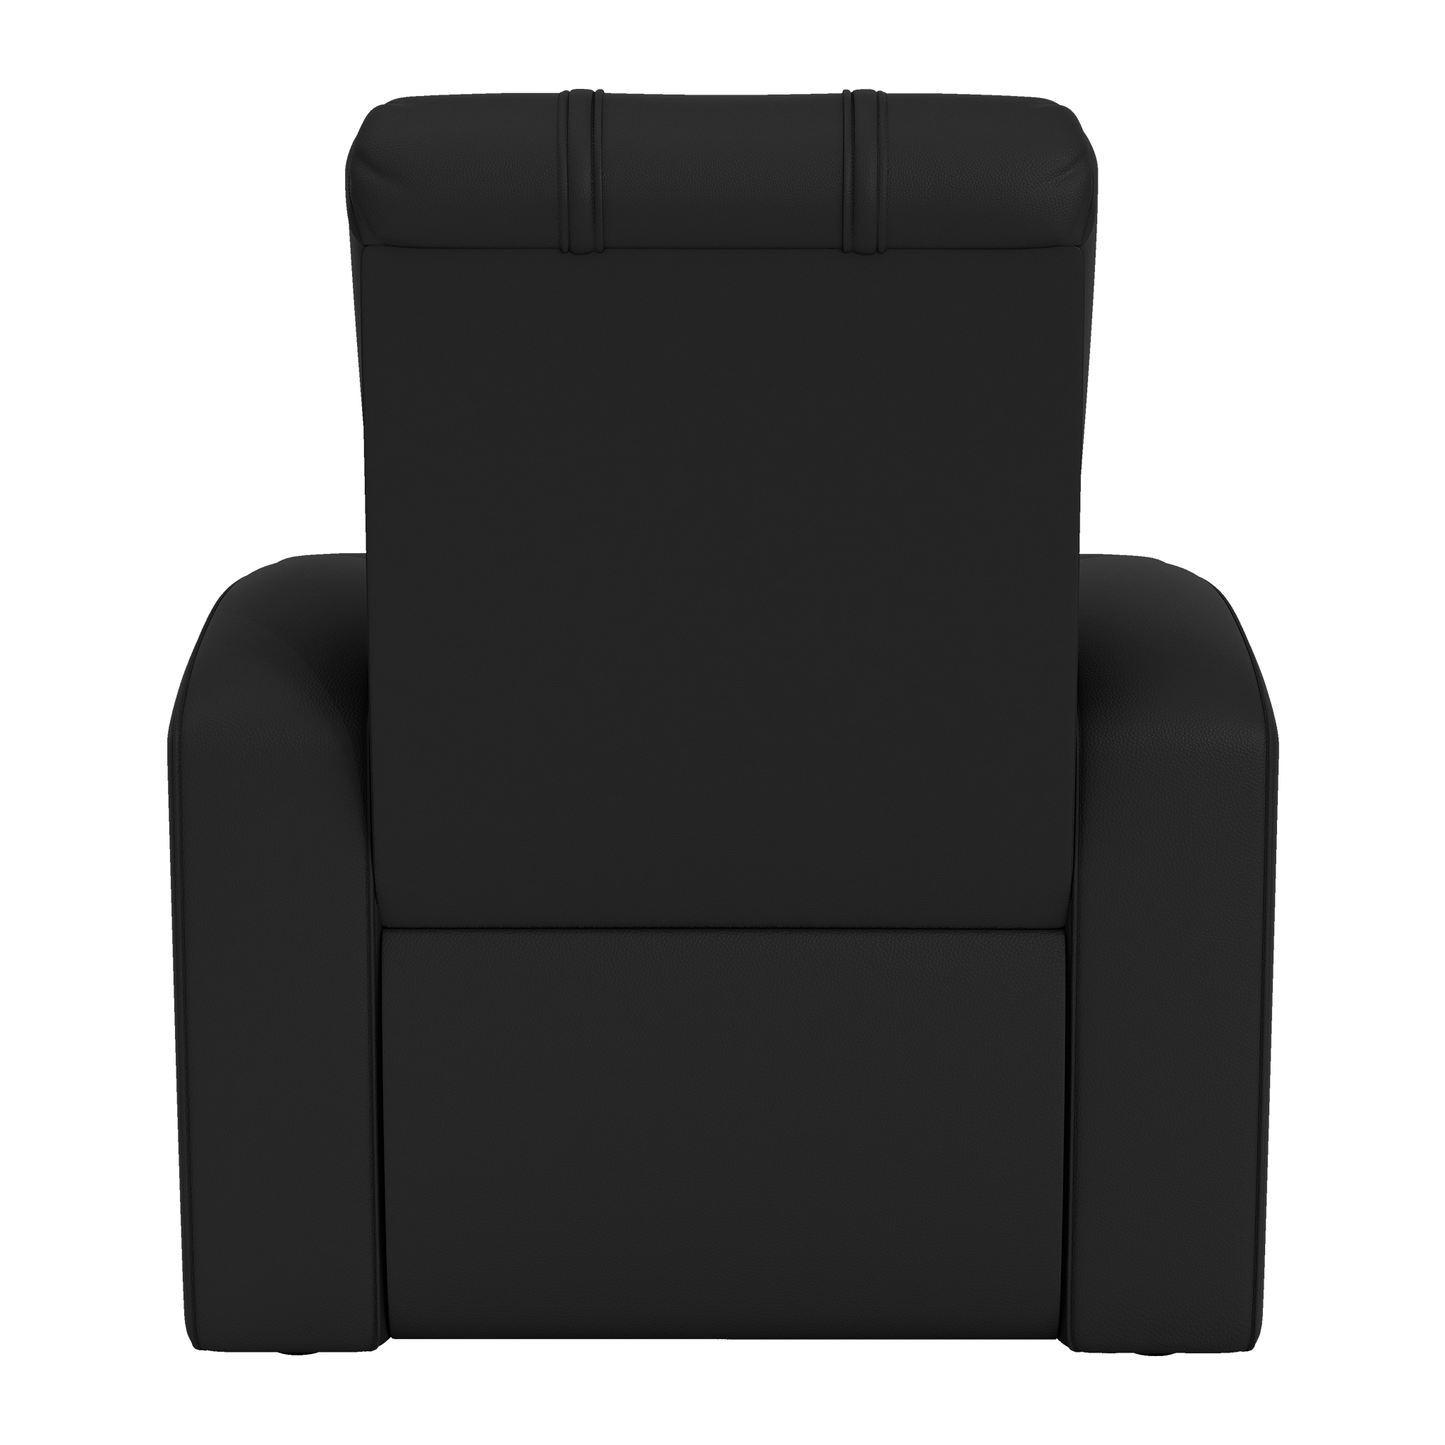 Relax Home Theater Recliner with C8R Alternate Logo